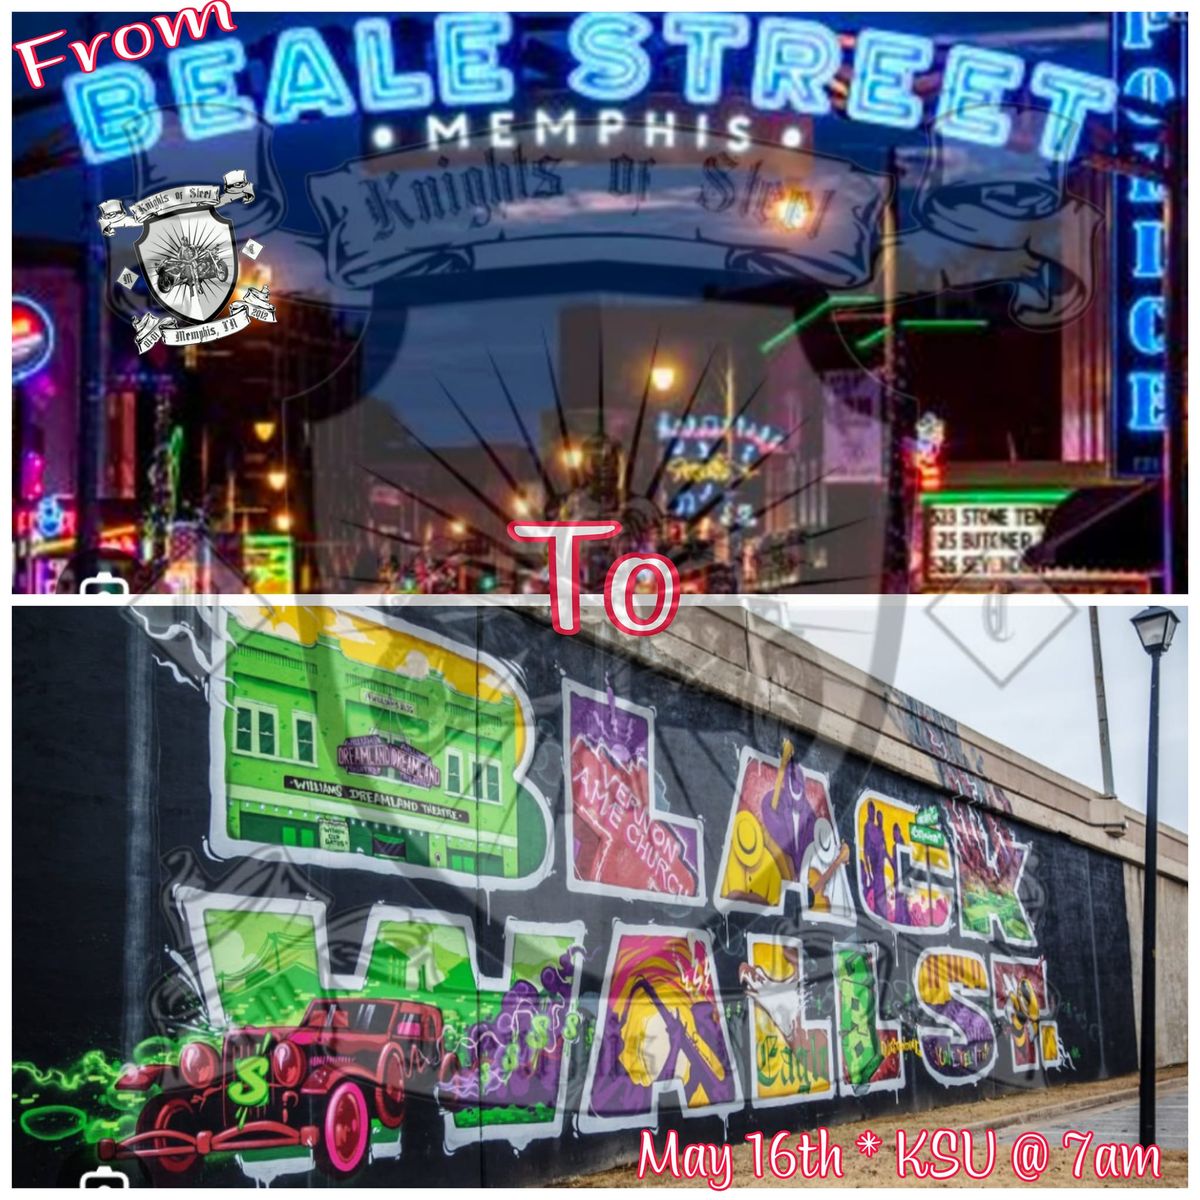 From Beale St to Black Wall Street